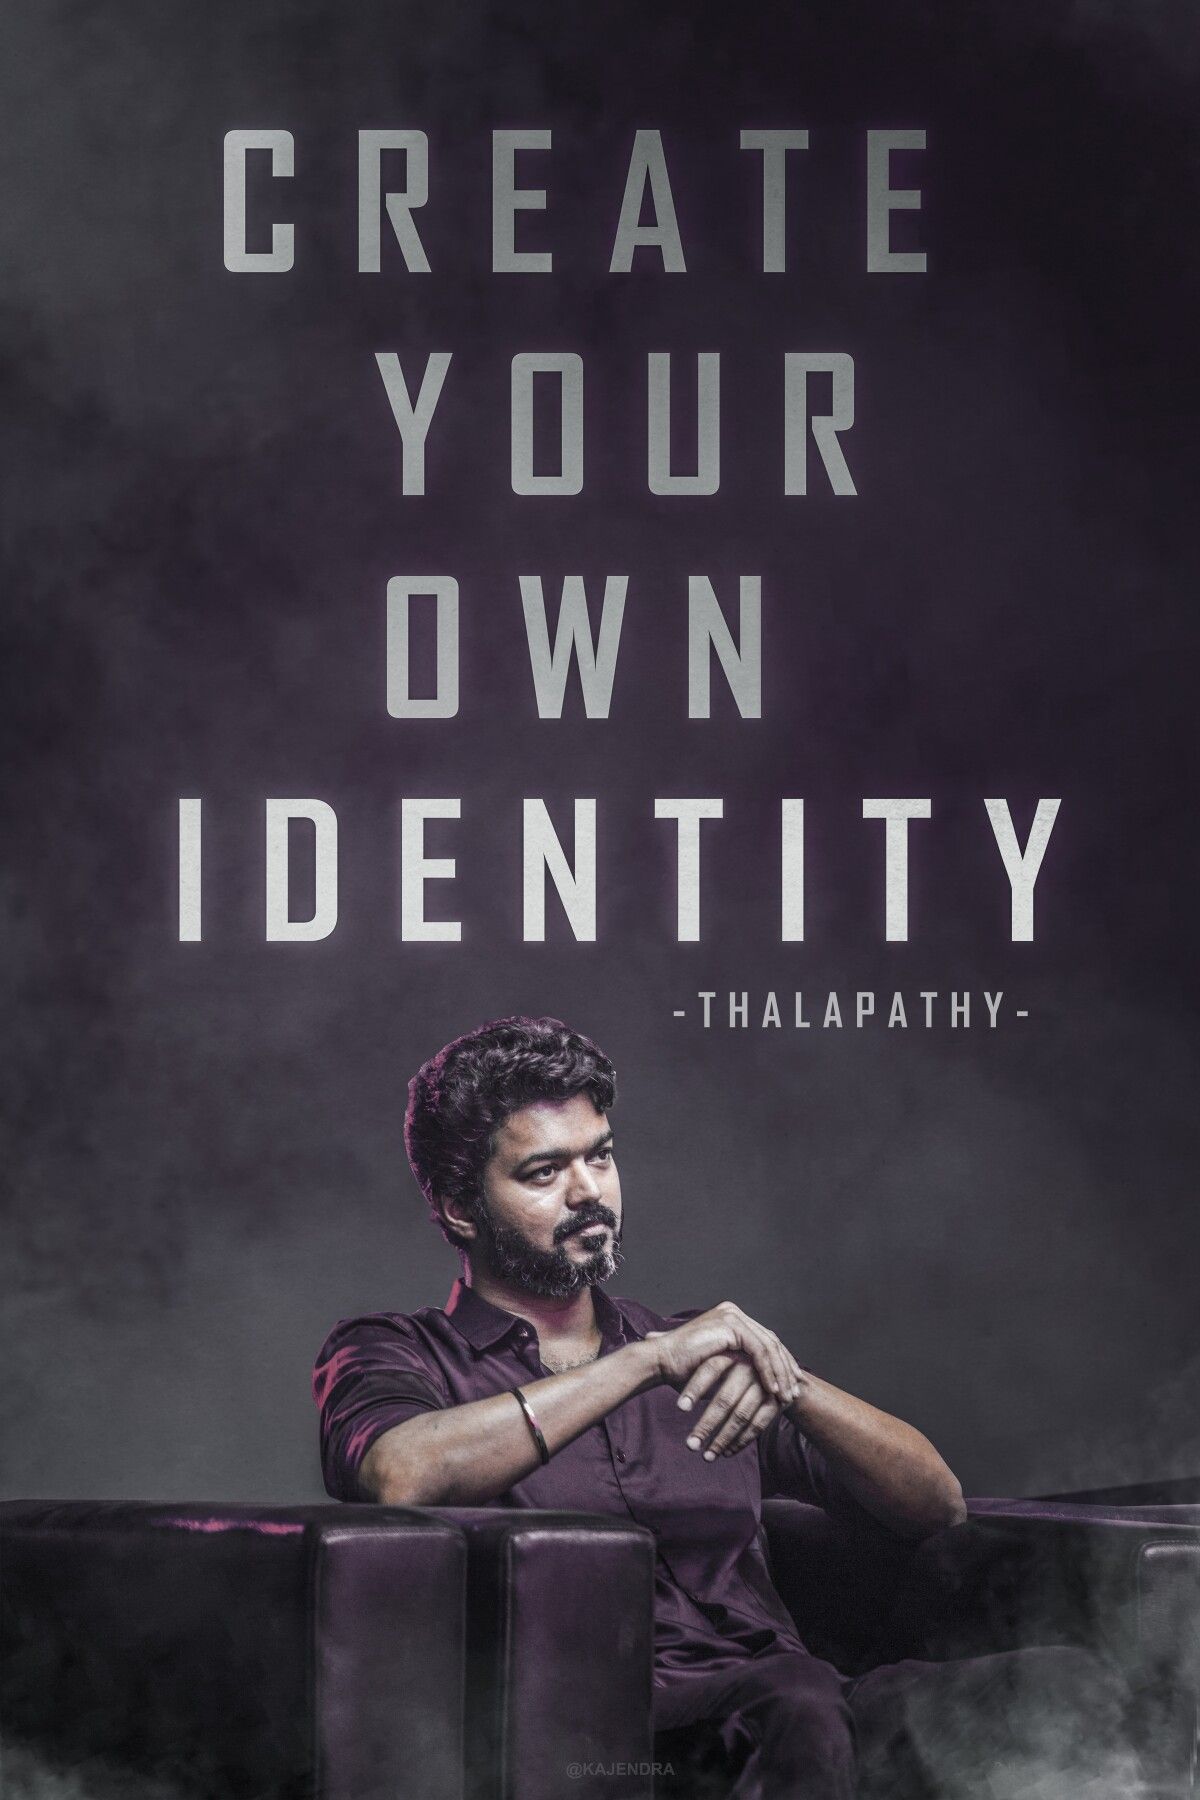 thalapathy Vijay. Actor quotes, Heroes actors, Inspirational quotes hd